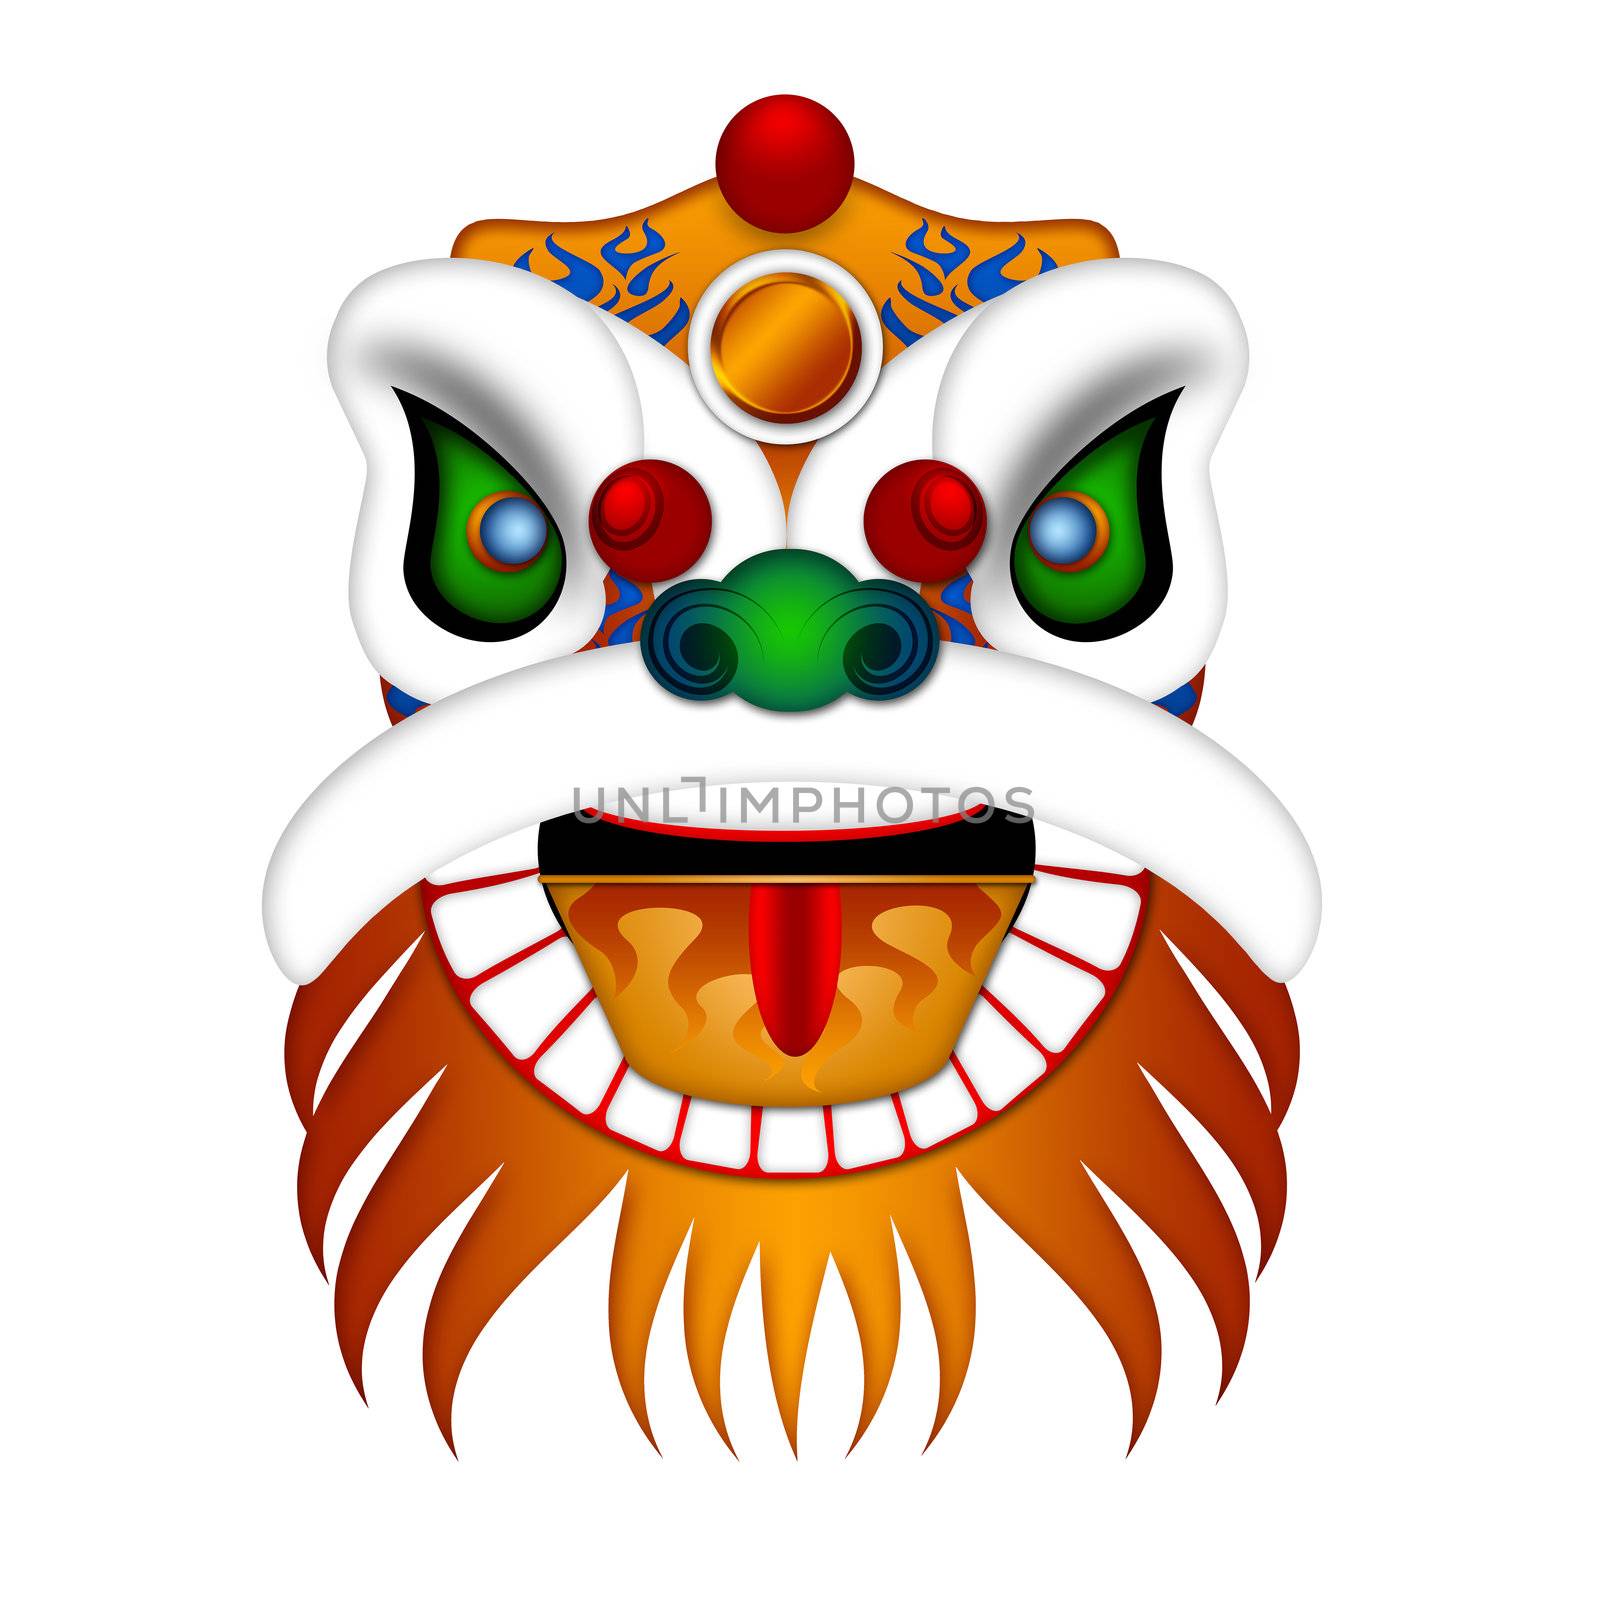 Chinese Lion Dance Head Illustration by jpldesigns